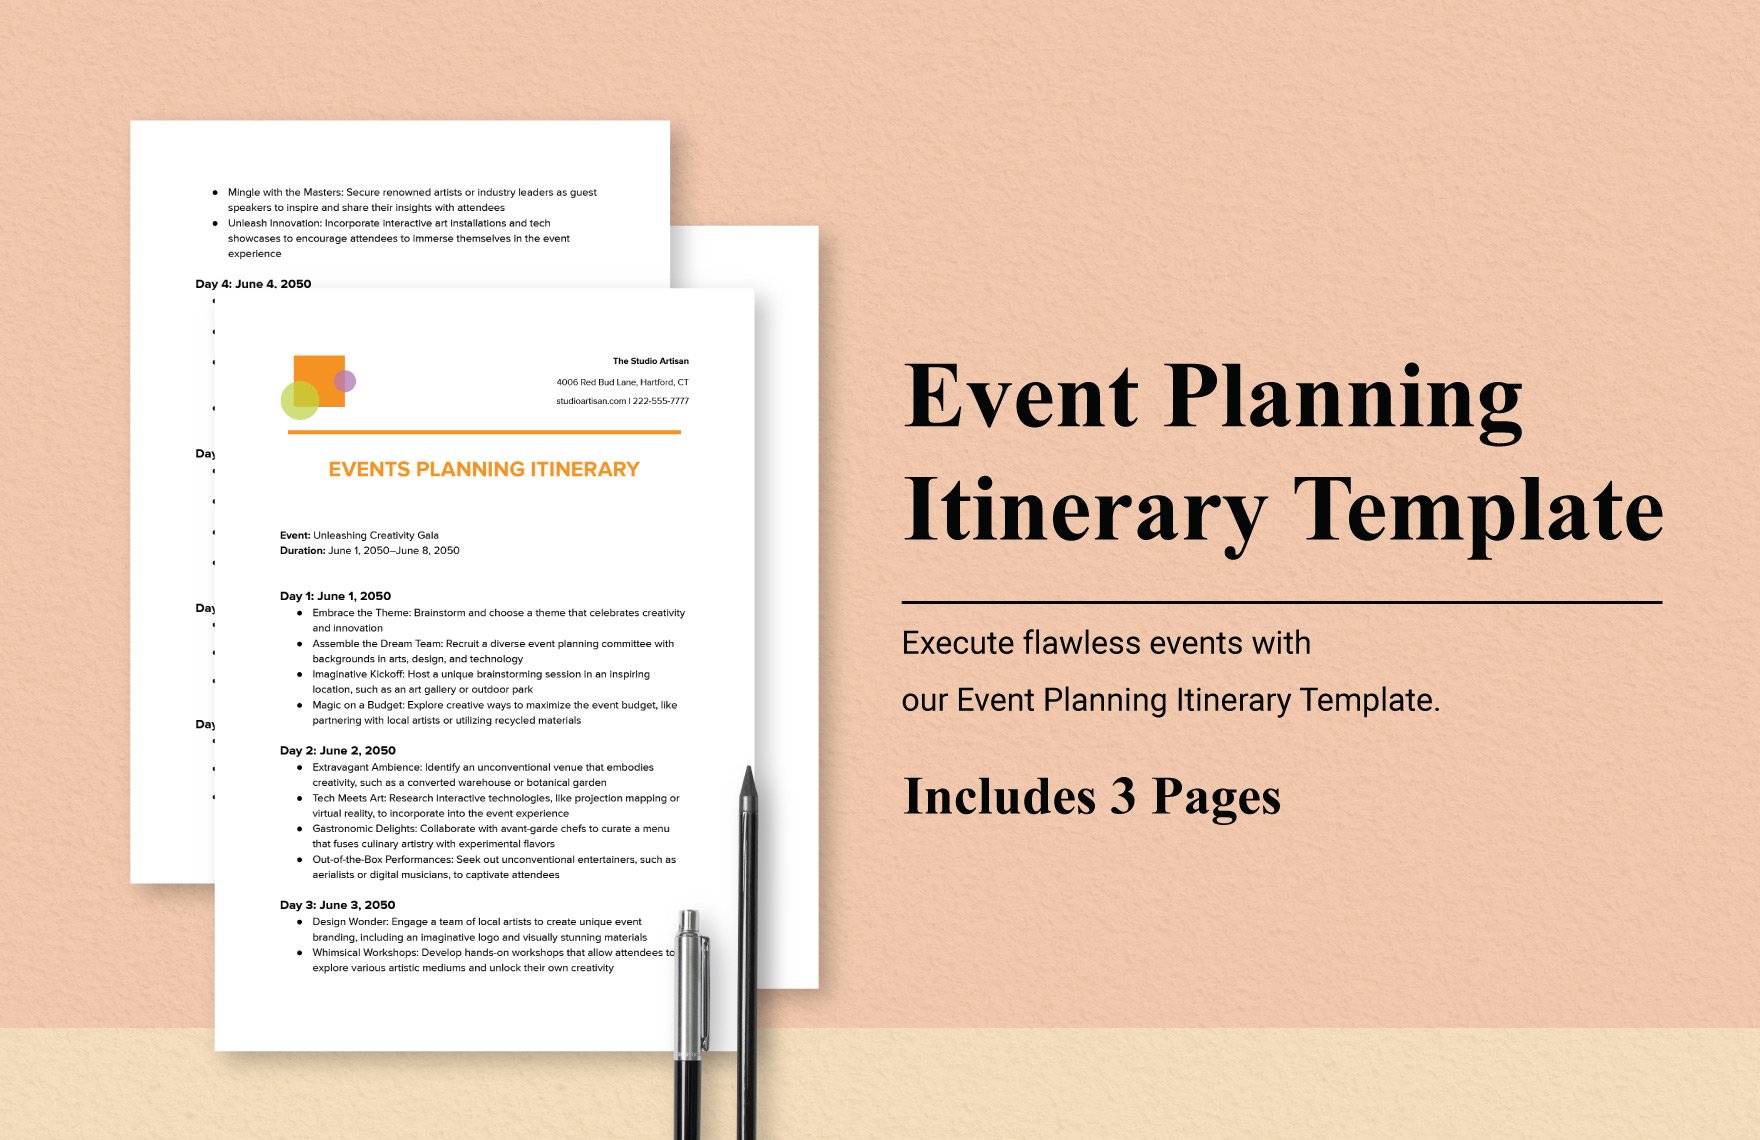 Event Planning Itinerary Template